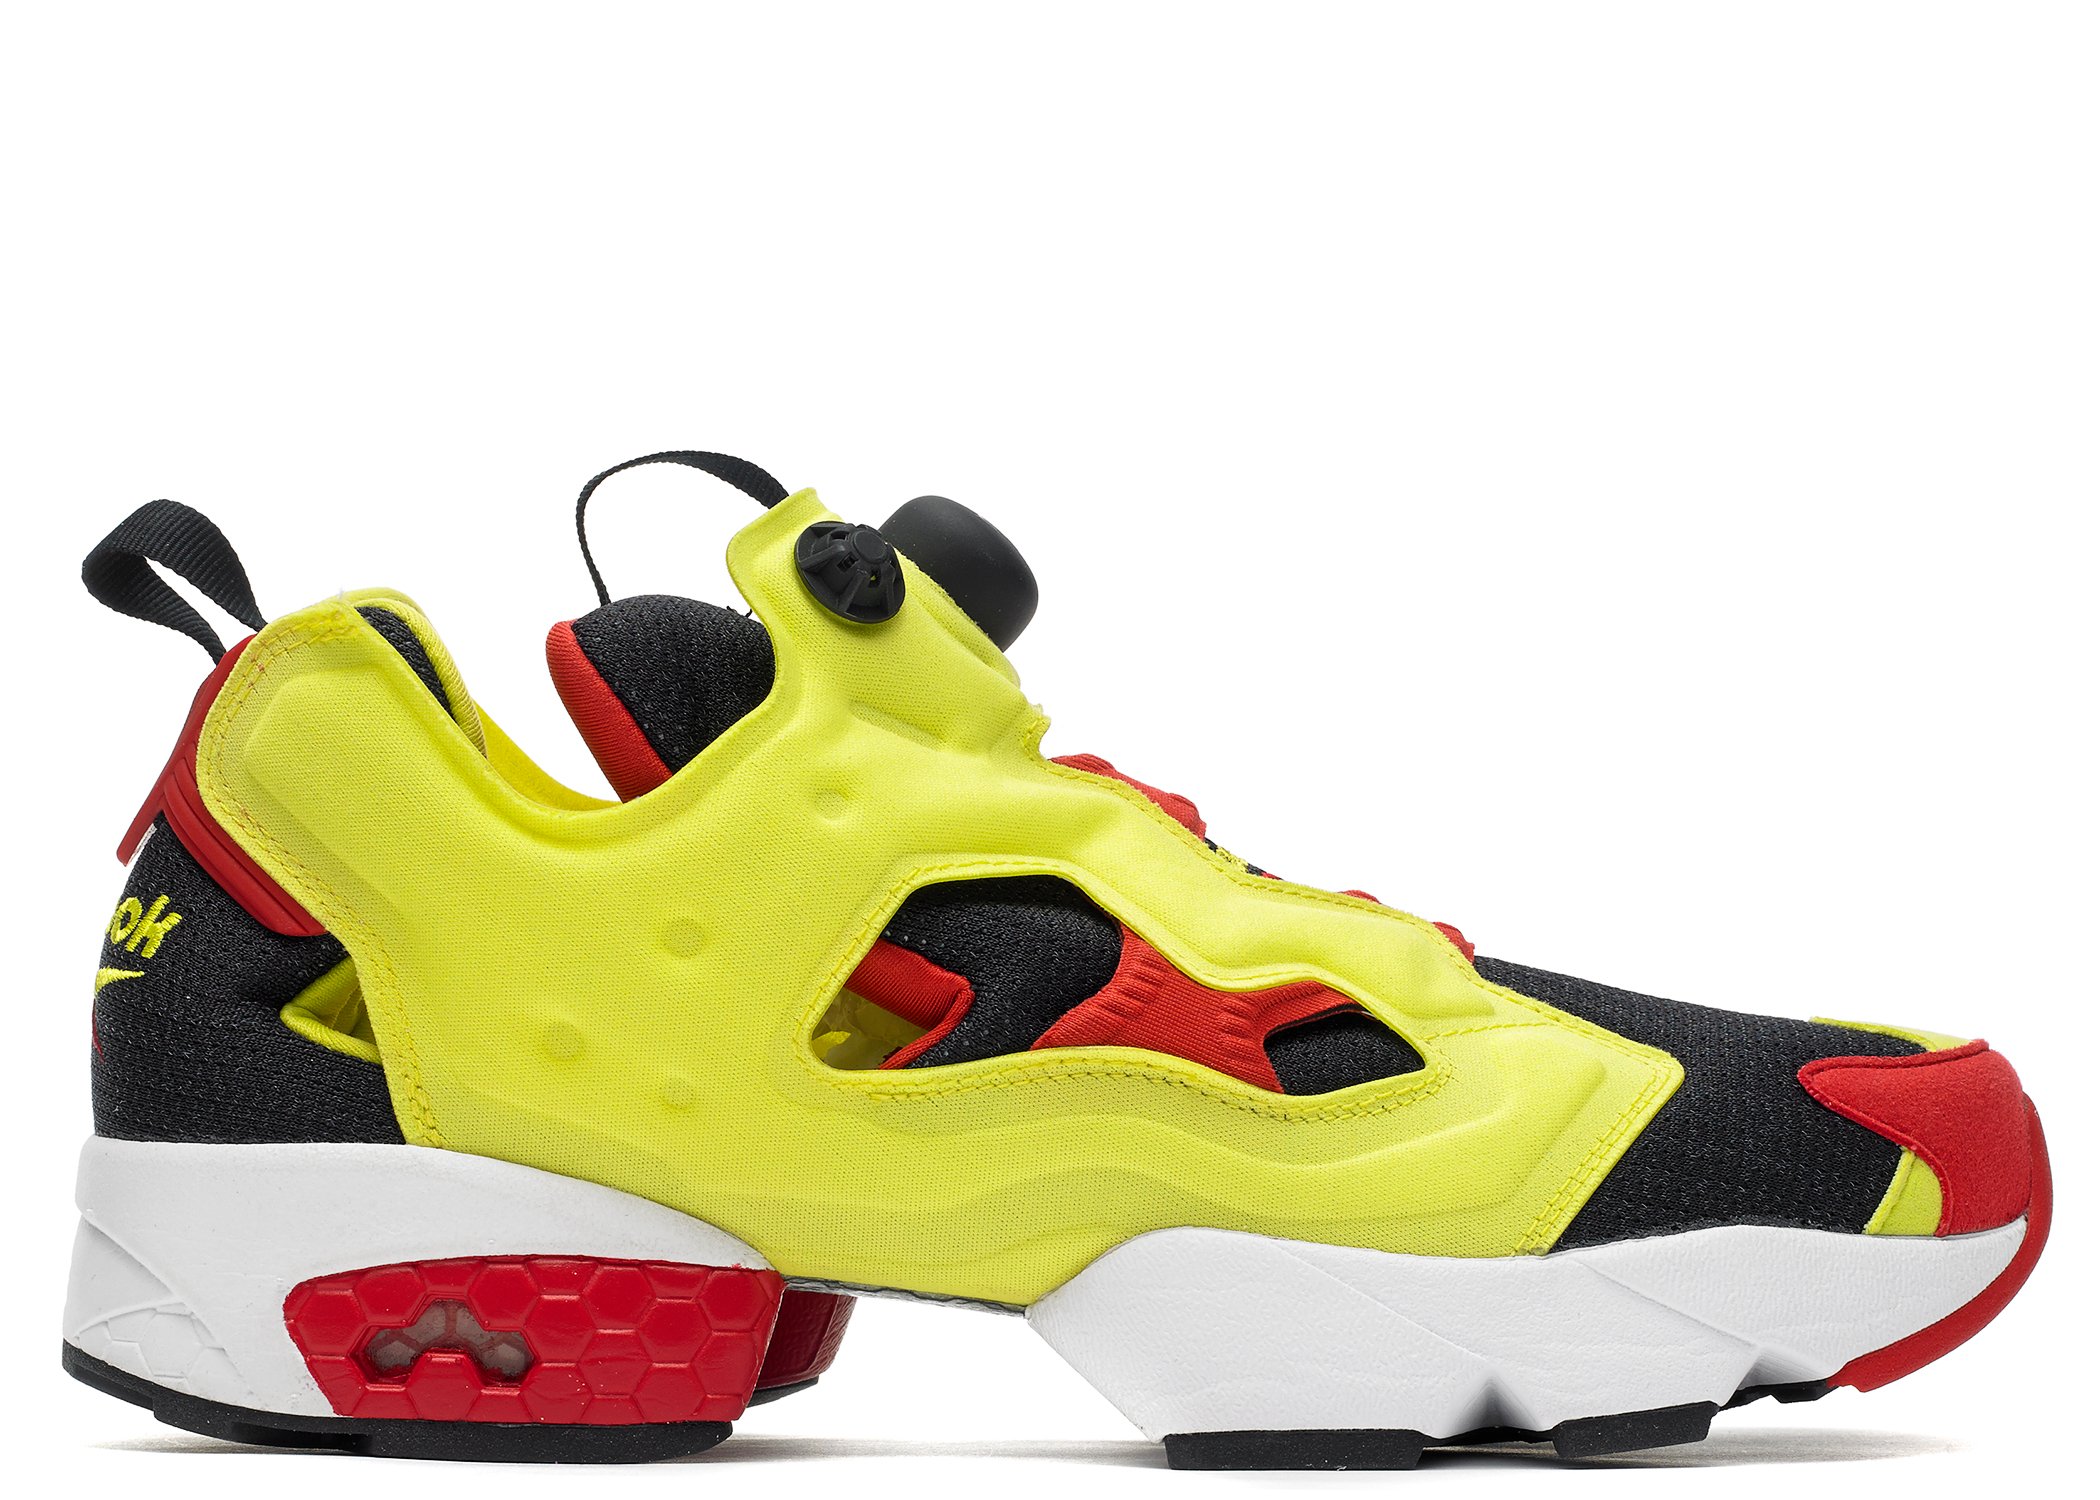 Reebok Insta Pump Fury OG 'Citron' | Official Images | SneakerFiles